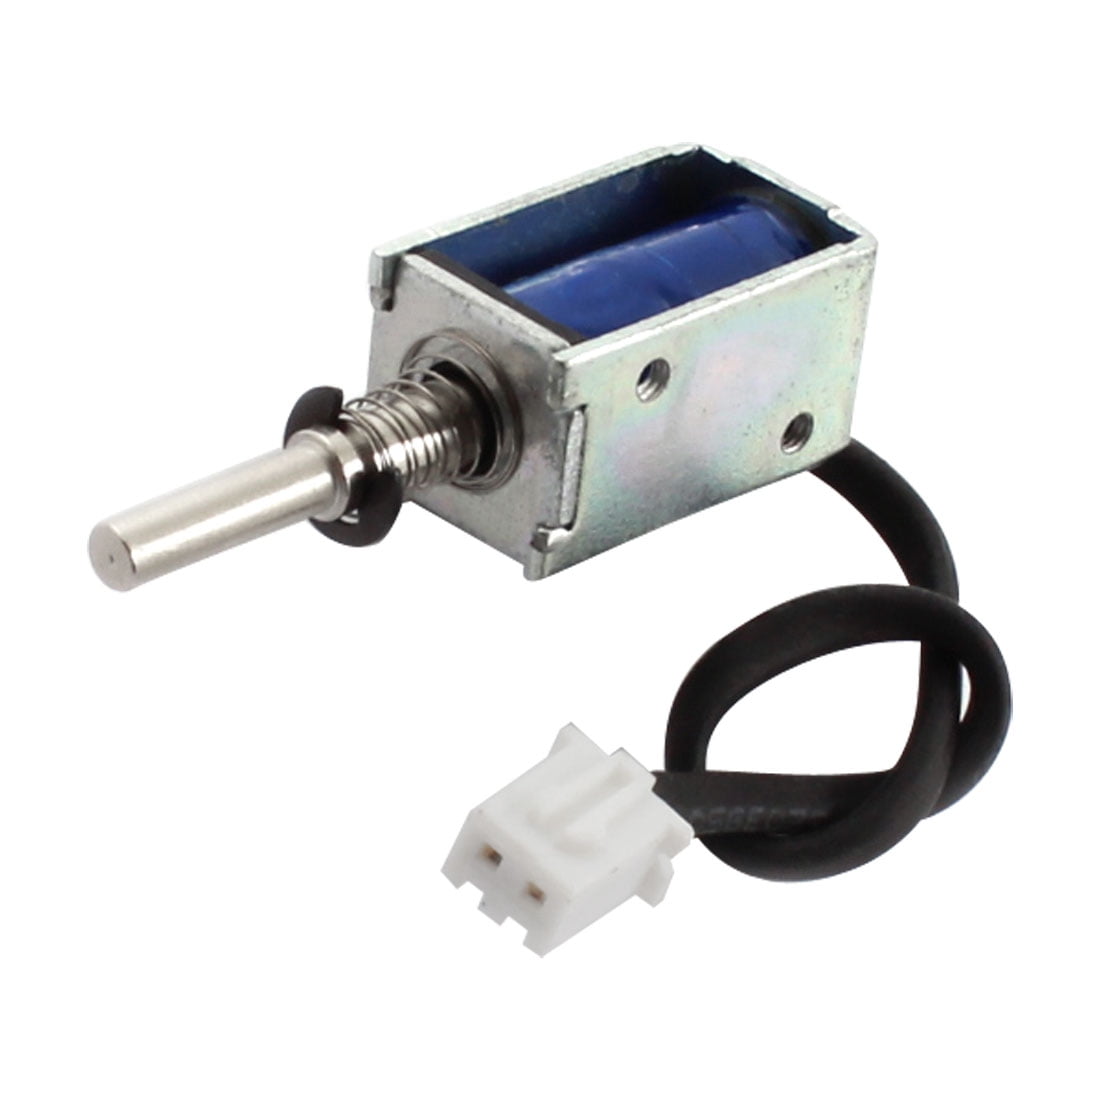 Uxcell DC 12V 400G/4 mm Open Frame Actuator Linear Pull Solenoid Electromagnet